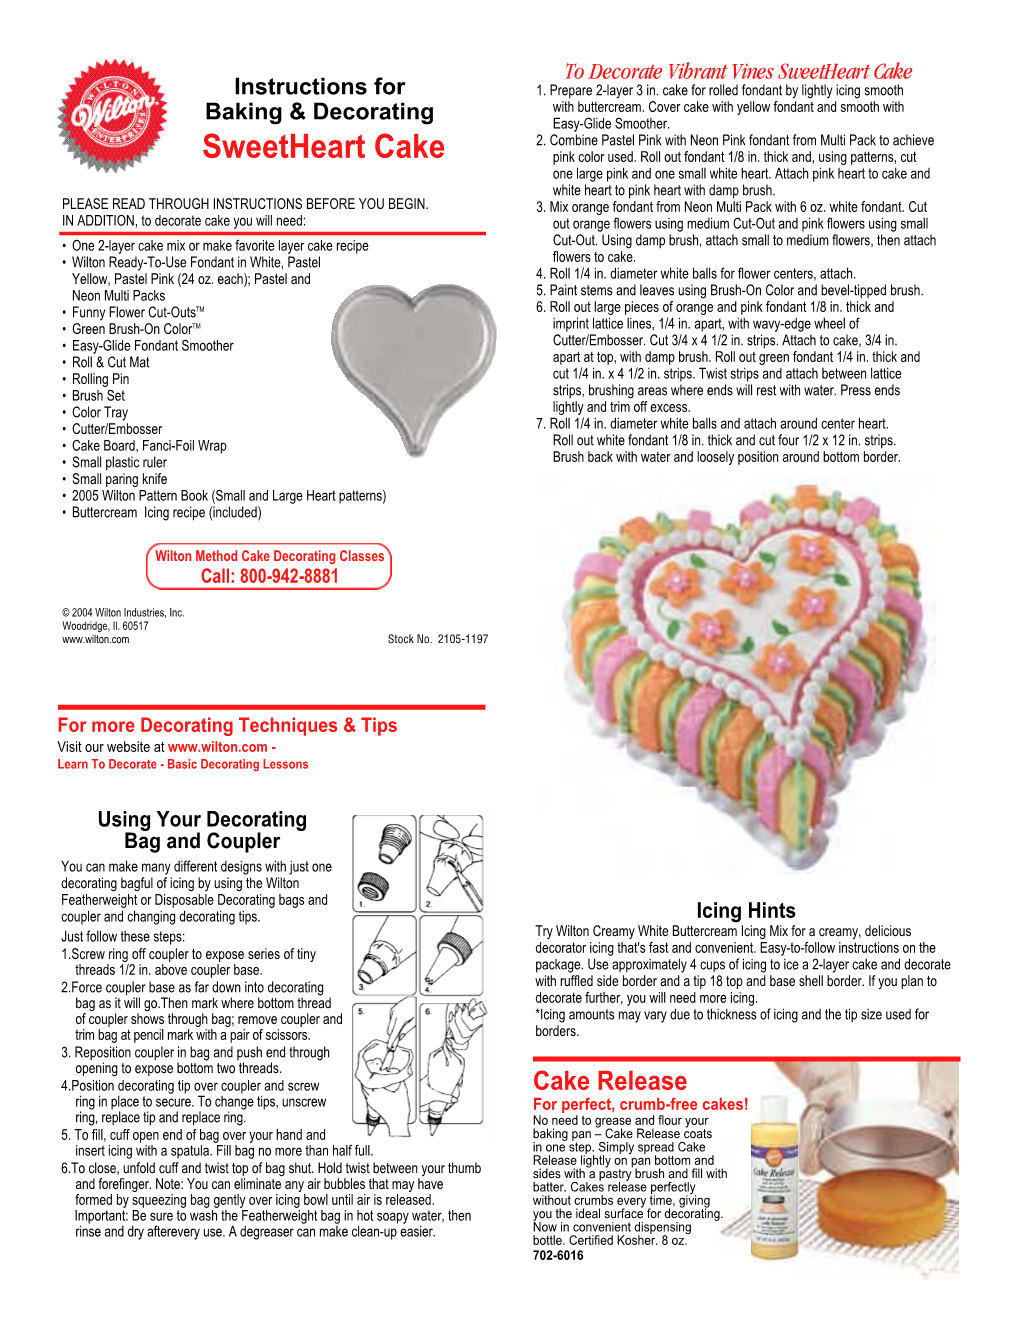 Sweetheart Cake Instructions for 1